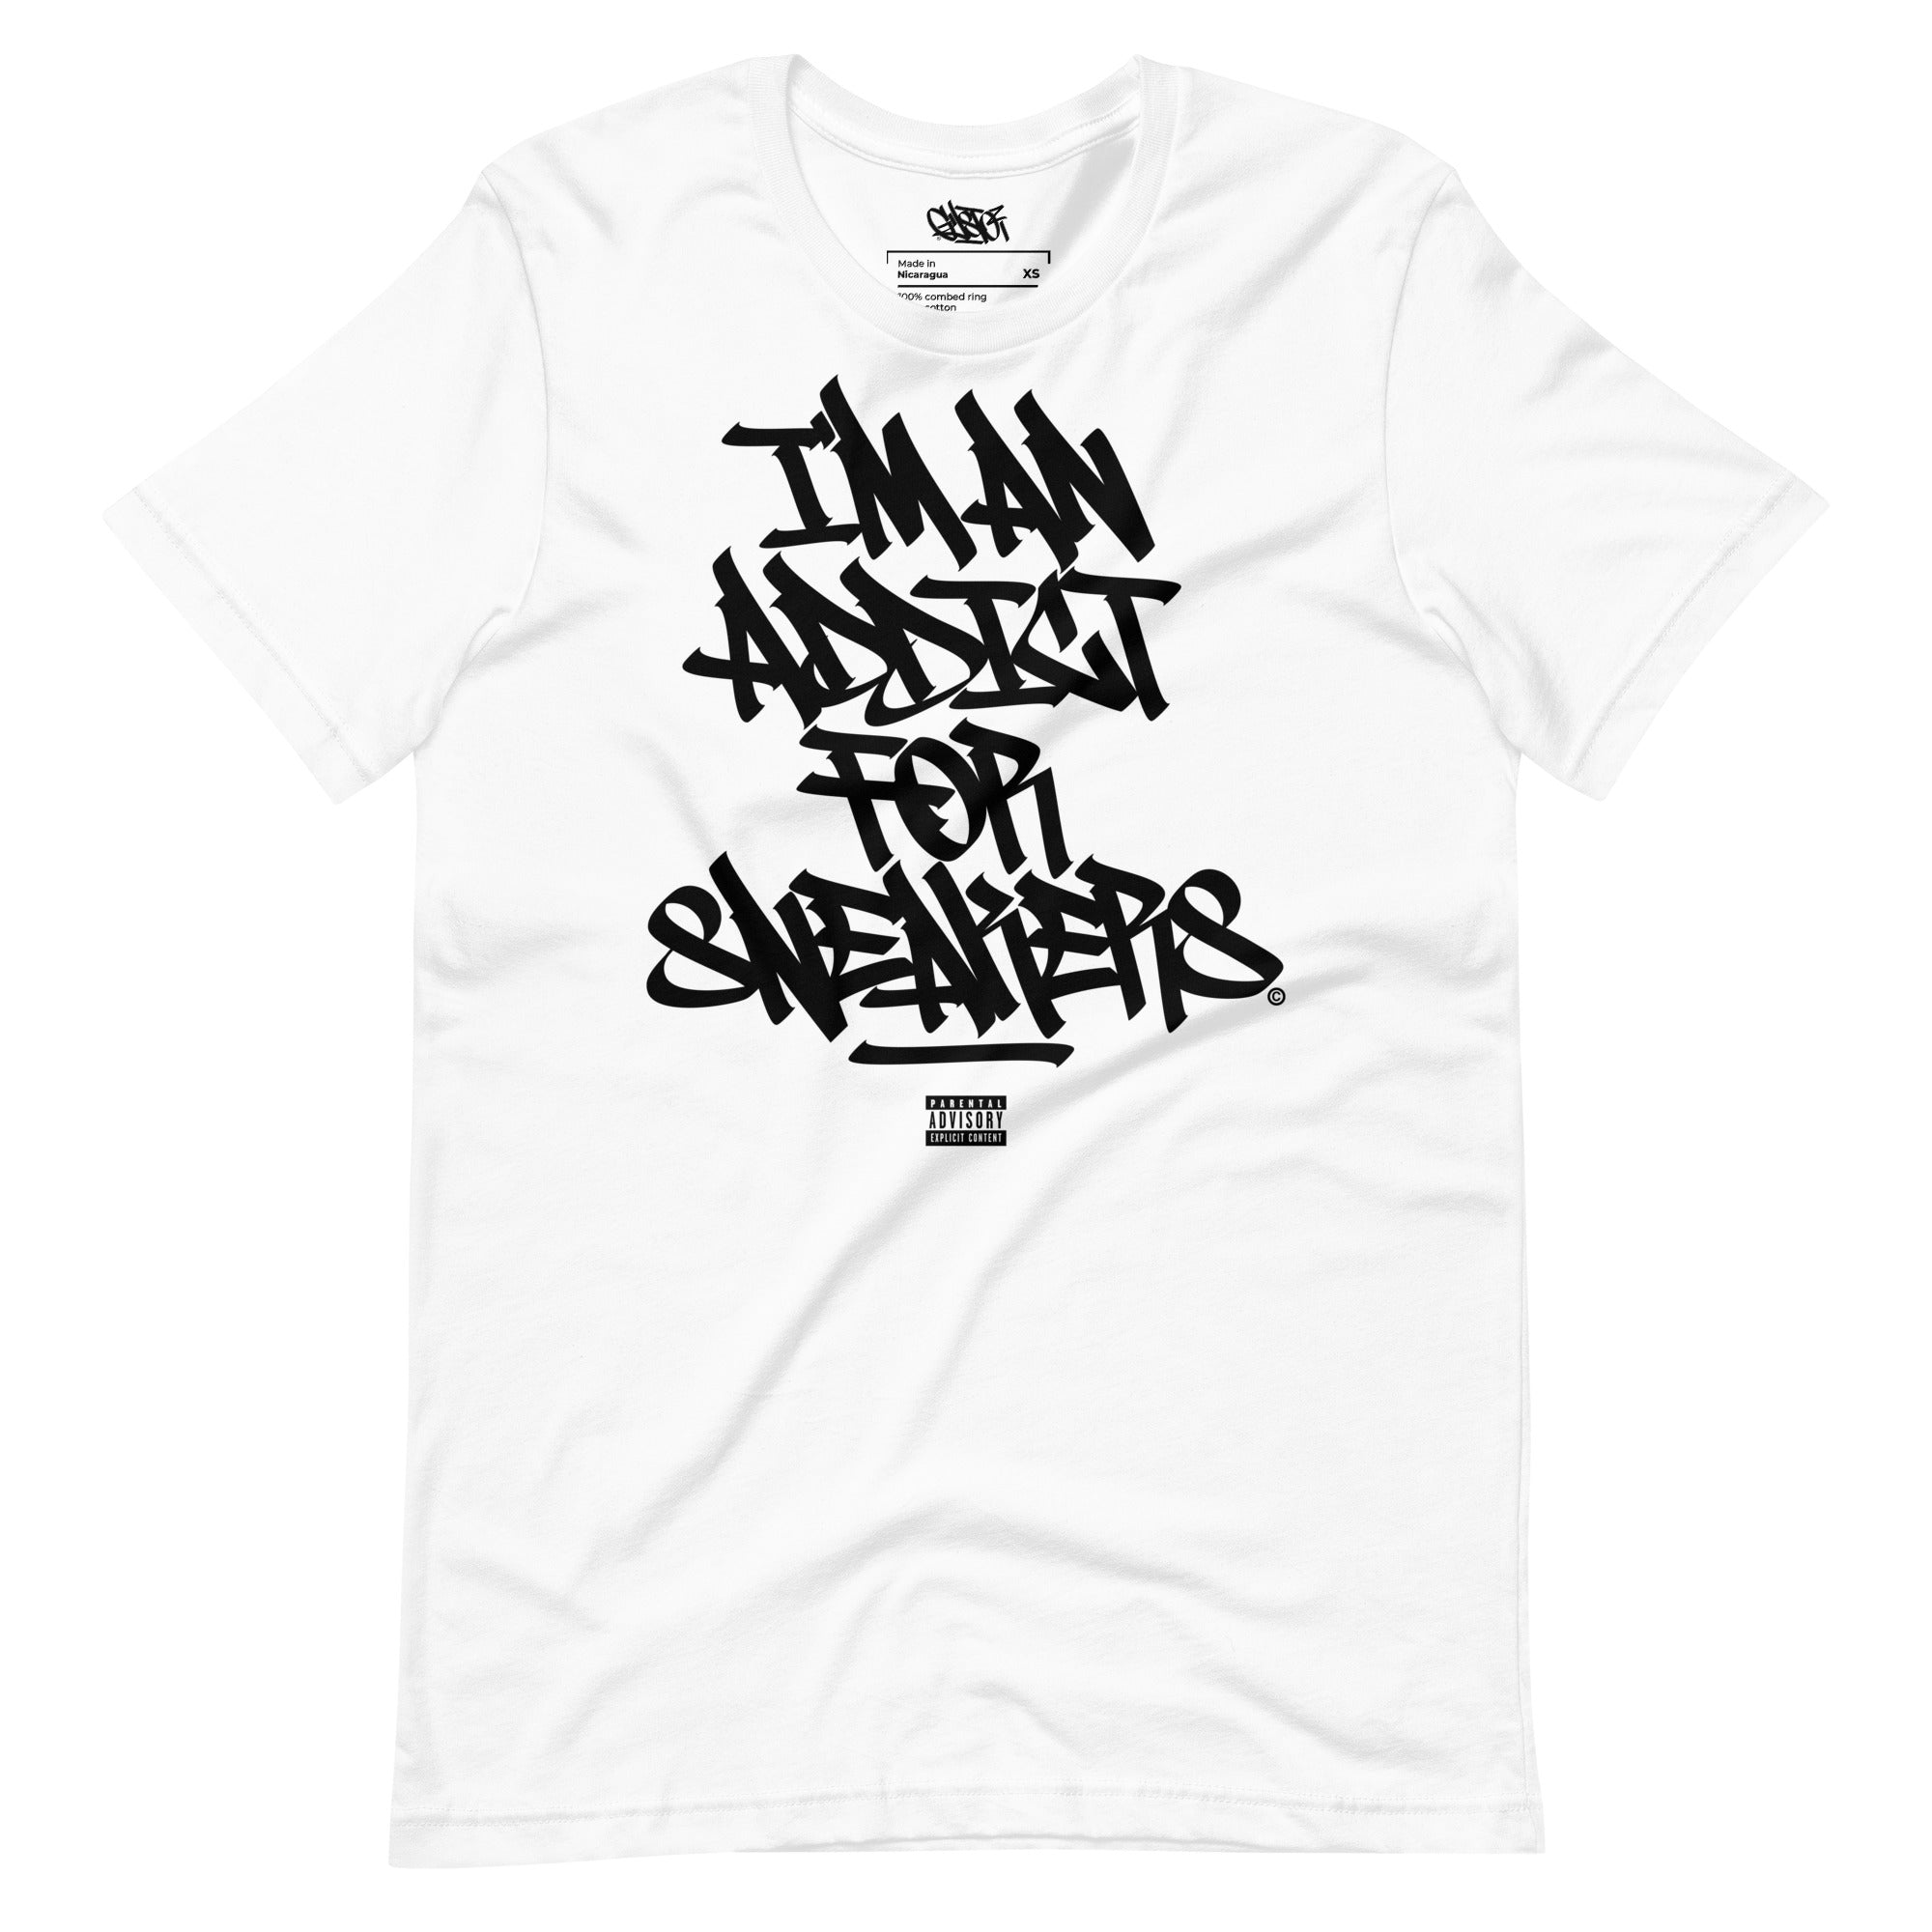 I'm An Addict For Sneakers - Unisex T-Shirt - GustoNYC